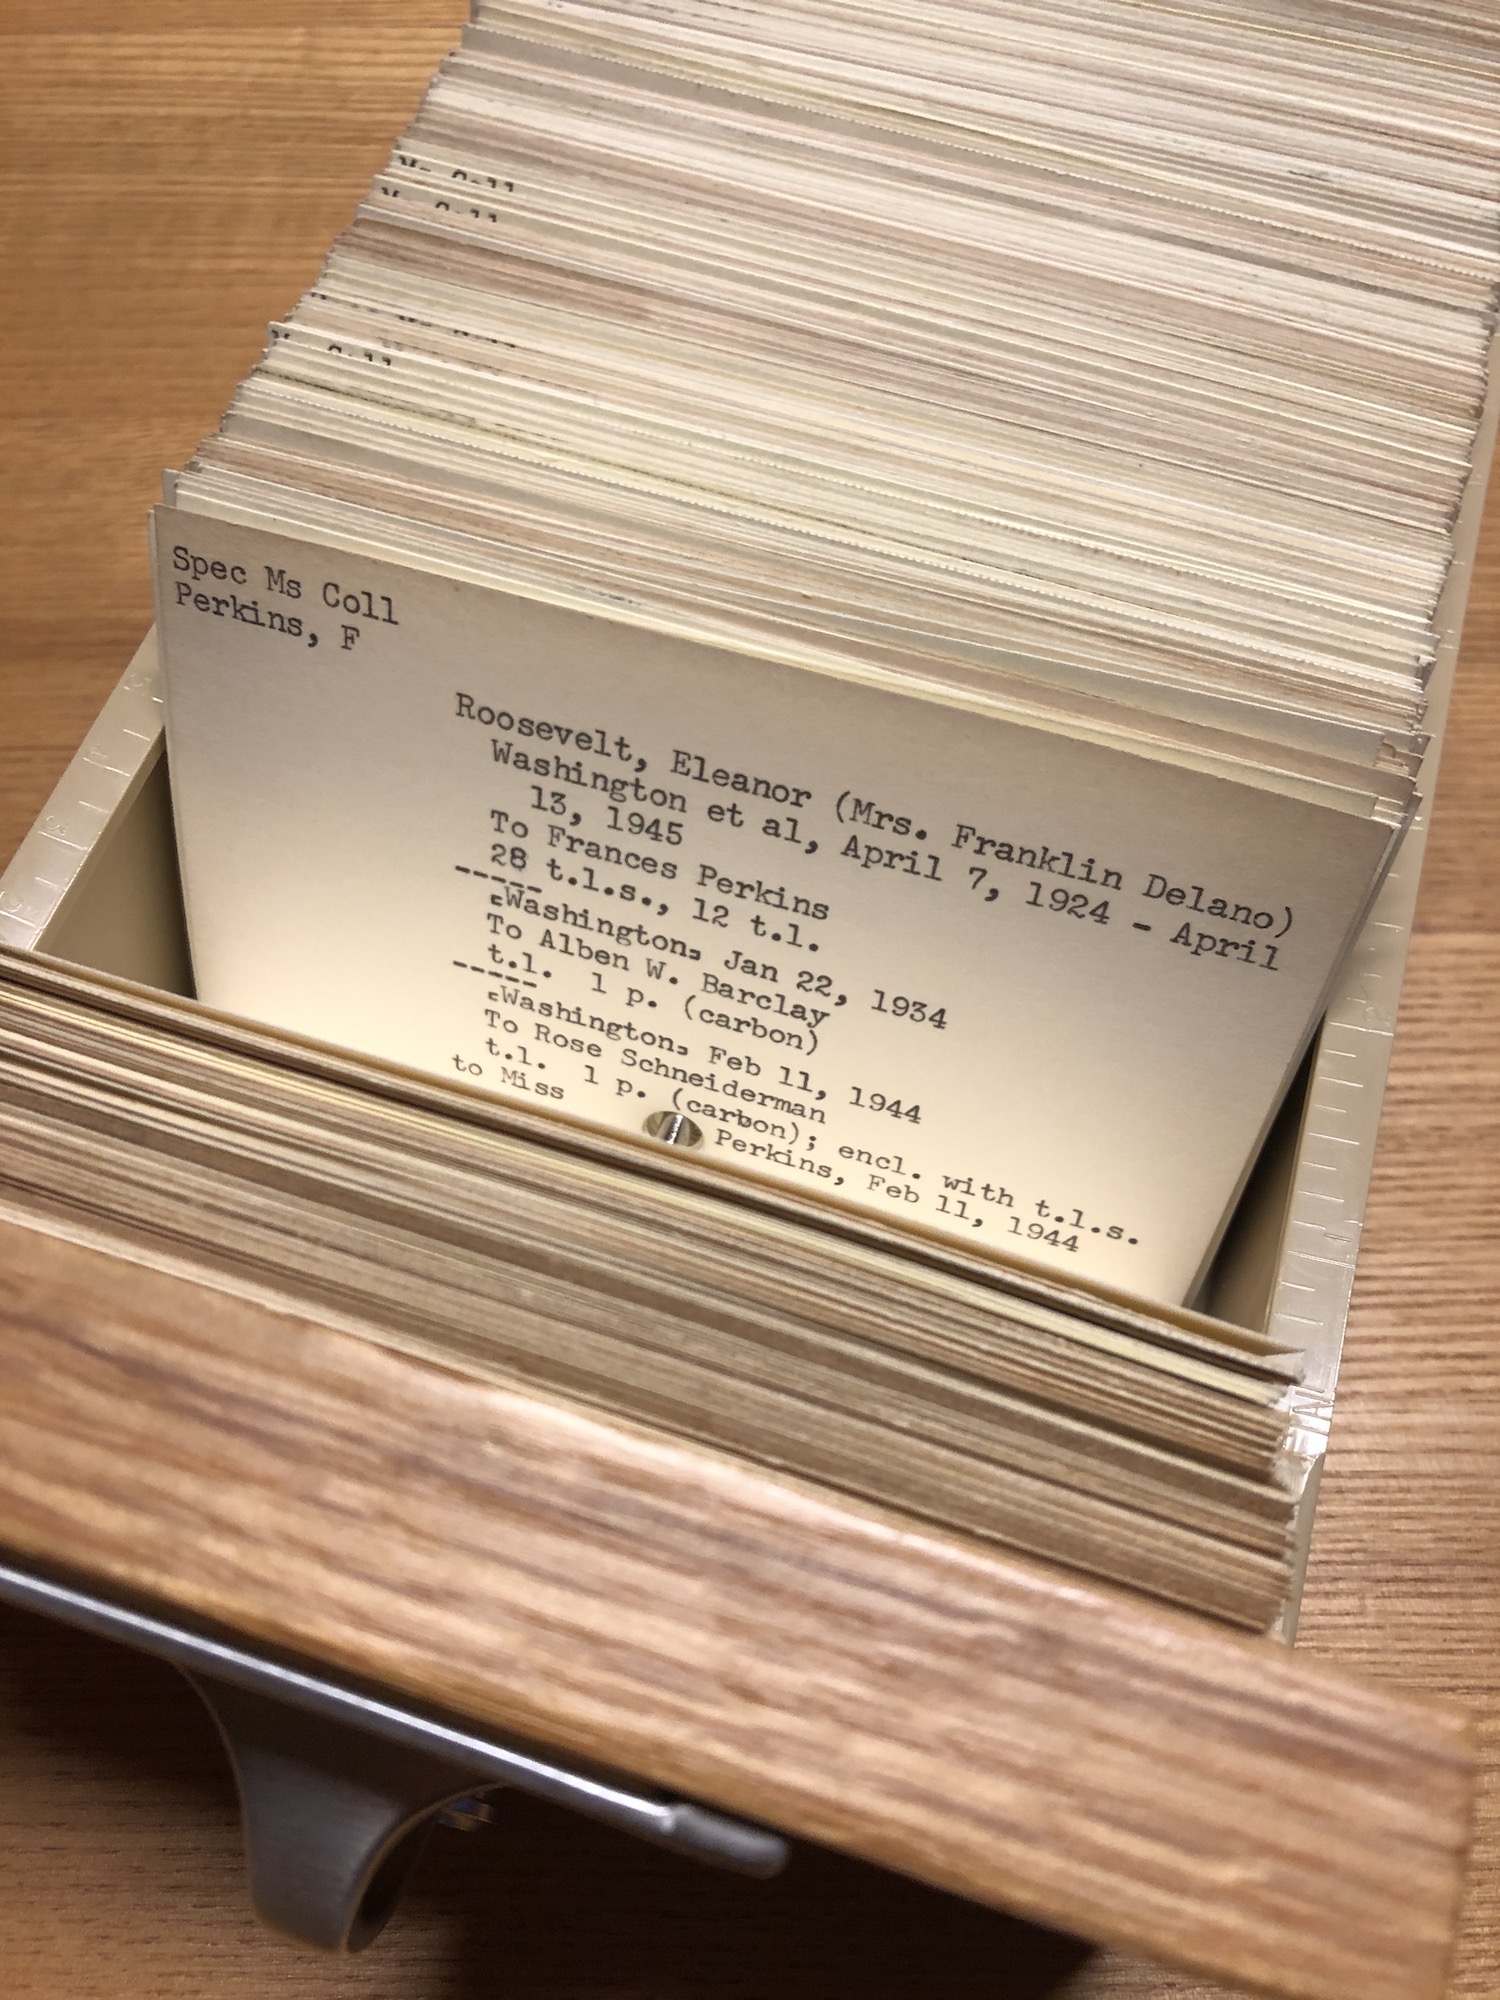 Identifying 1,257 Married Women by their Full Names in Columbia University Rare Book and Manuscript Library Finding Aids | Peer to Peer Review